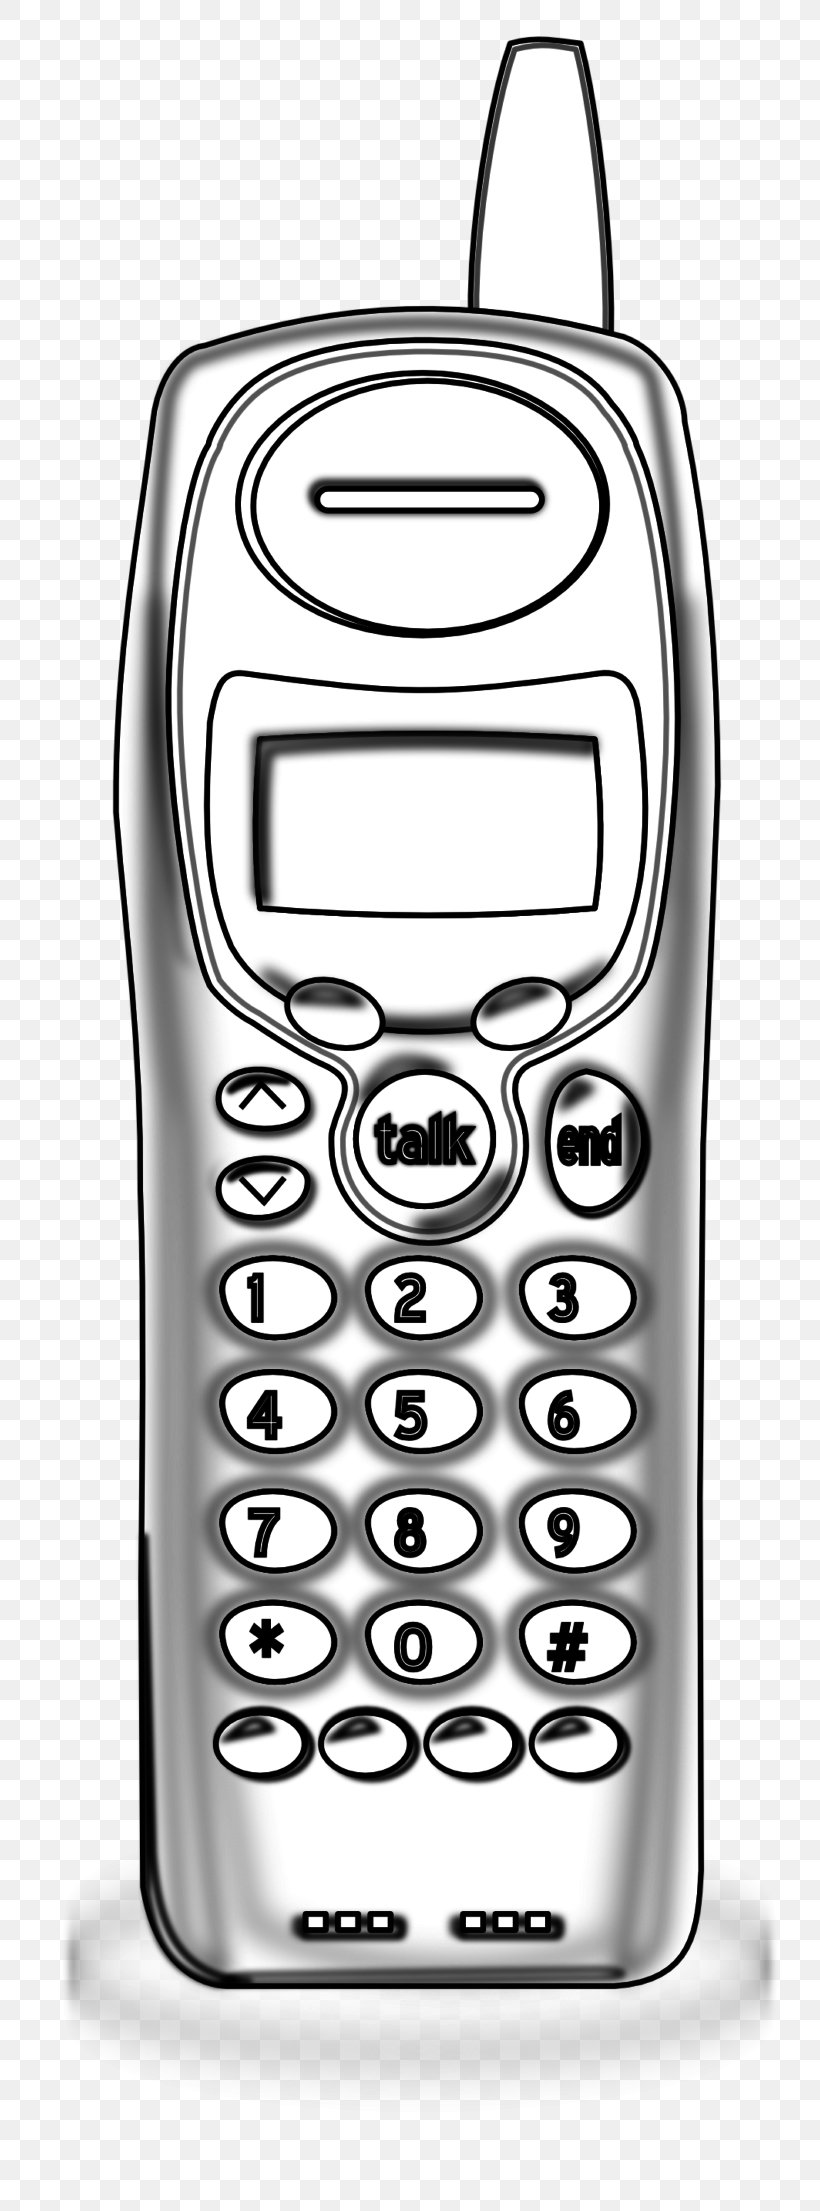 Coloring Book Cordless Telephone Chatter Telephone IPhone, PNG, 770x2211px, Coloring Book, Black And White, Chatter Telephone, Color, Cordless Download Free